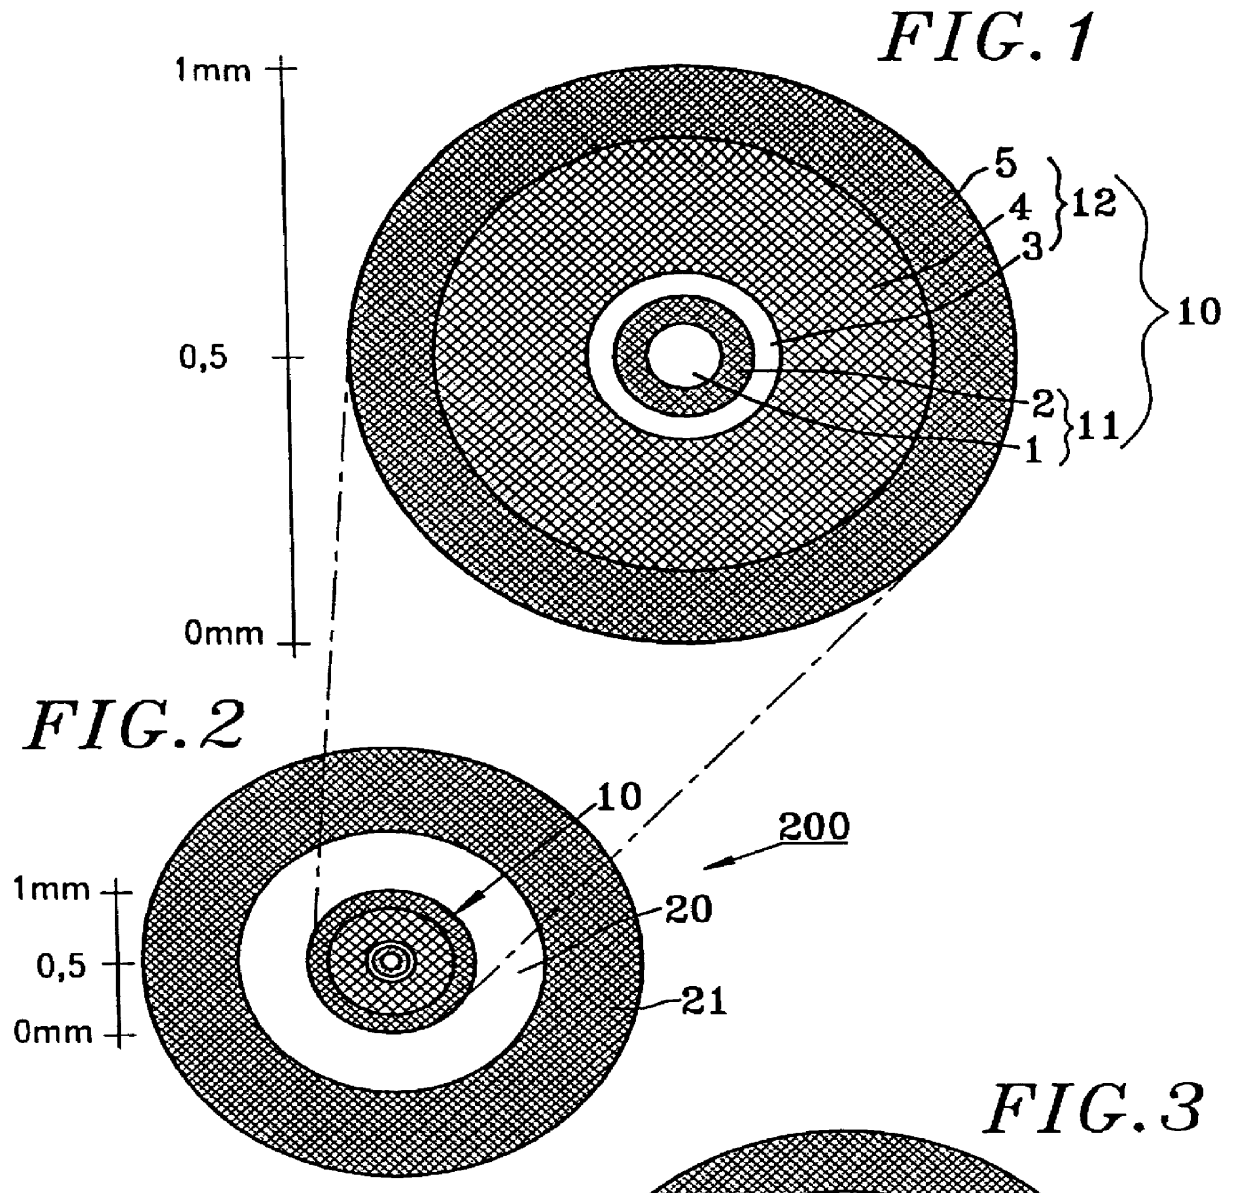 Structures of optical fiber cables self-reinforced against compression